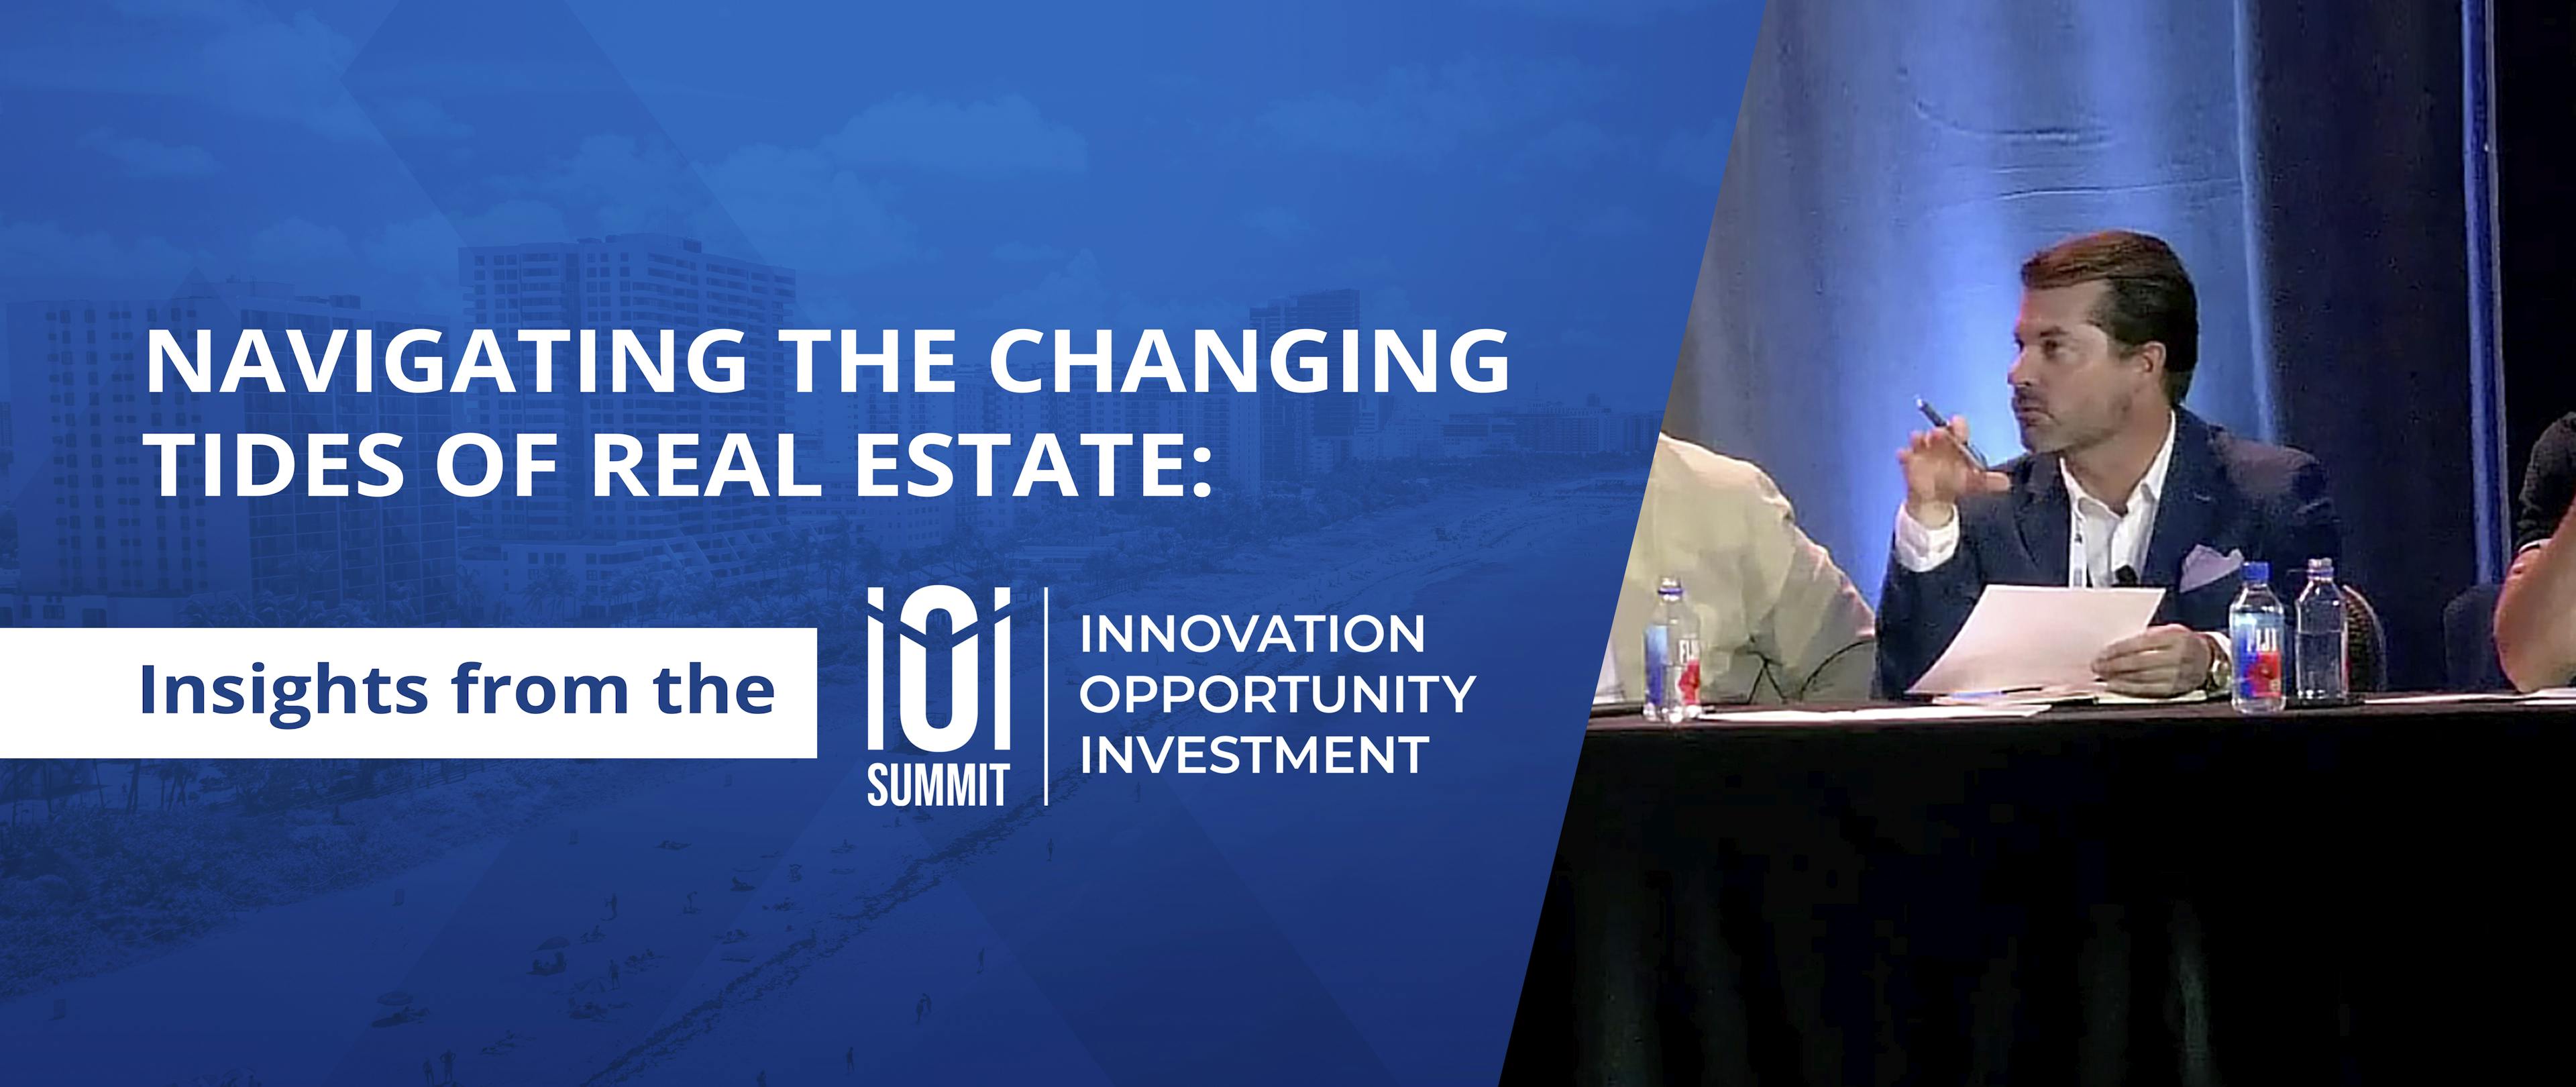 Navigating the Changing Tides of Real Estate: Insights from the 2023 iOi Summit1